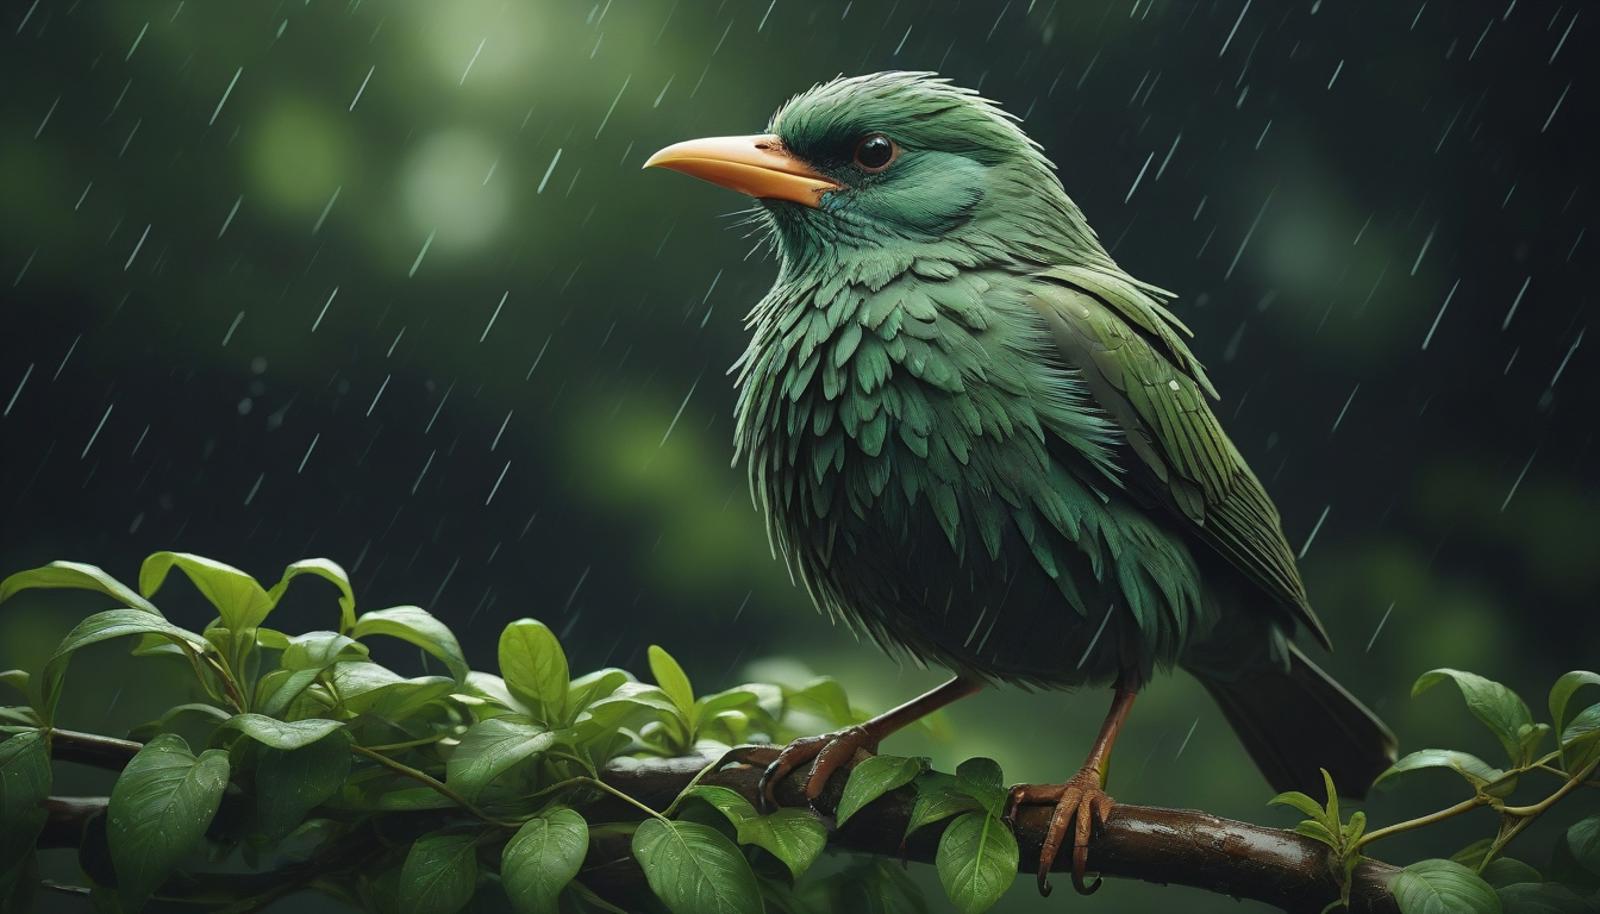 Green Bird Perched on Branch in Rain